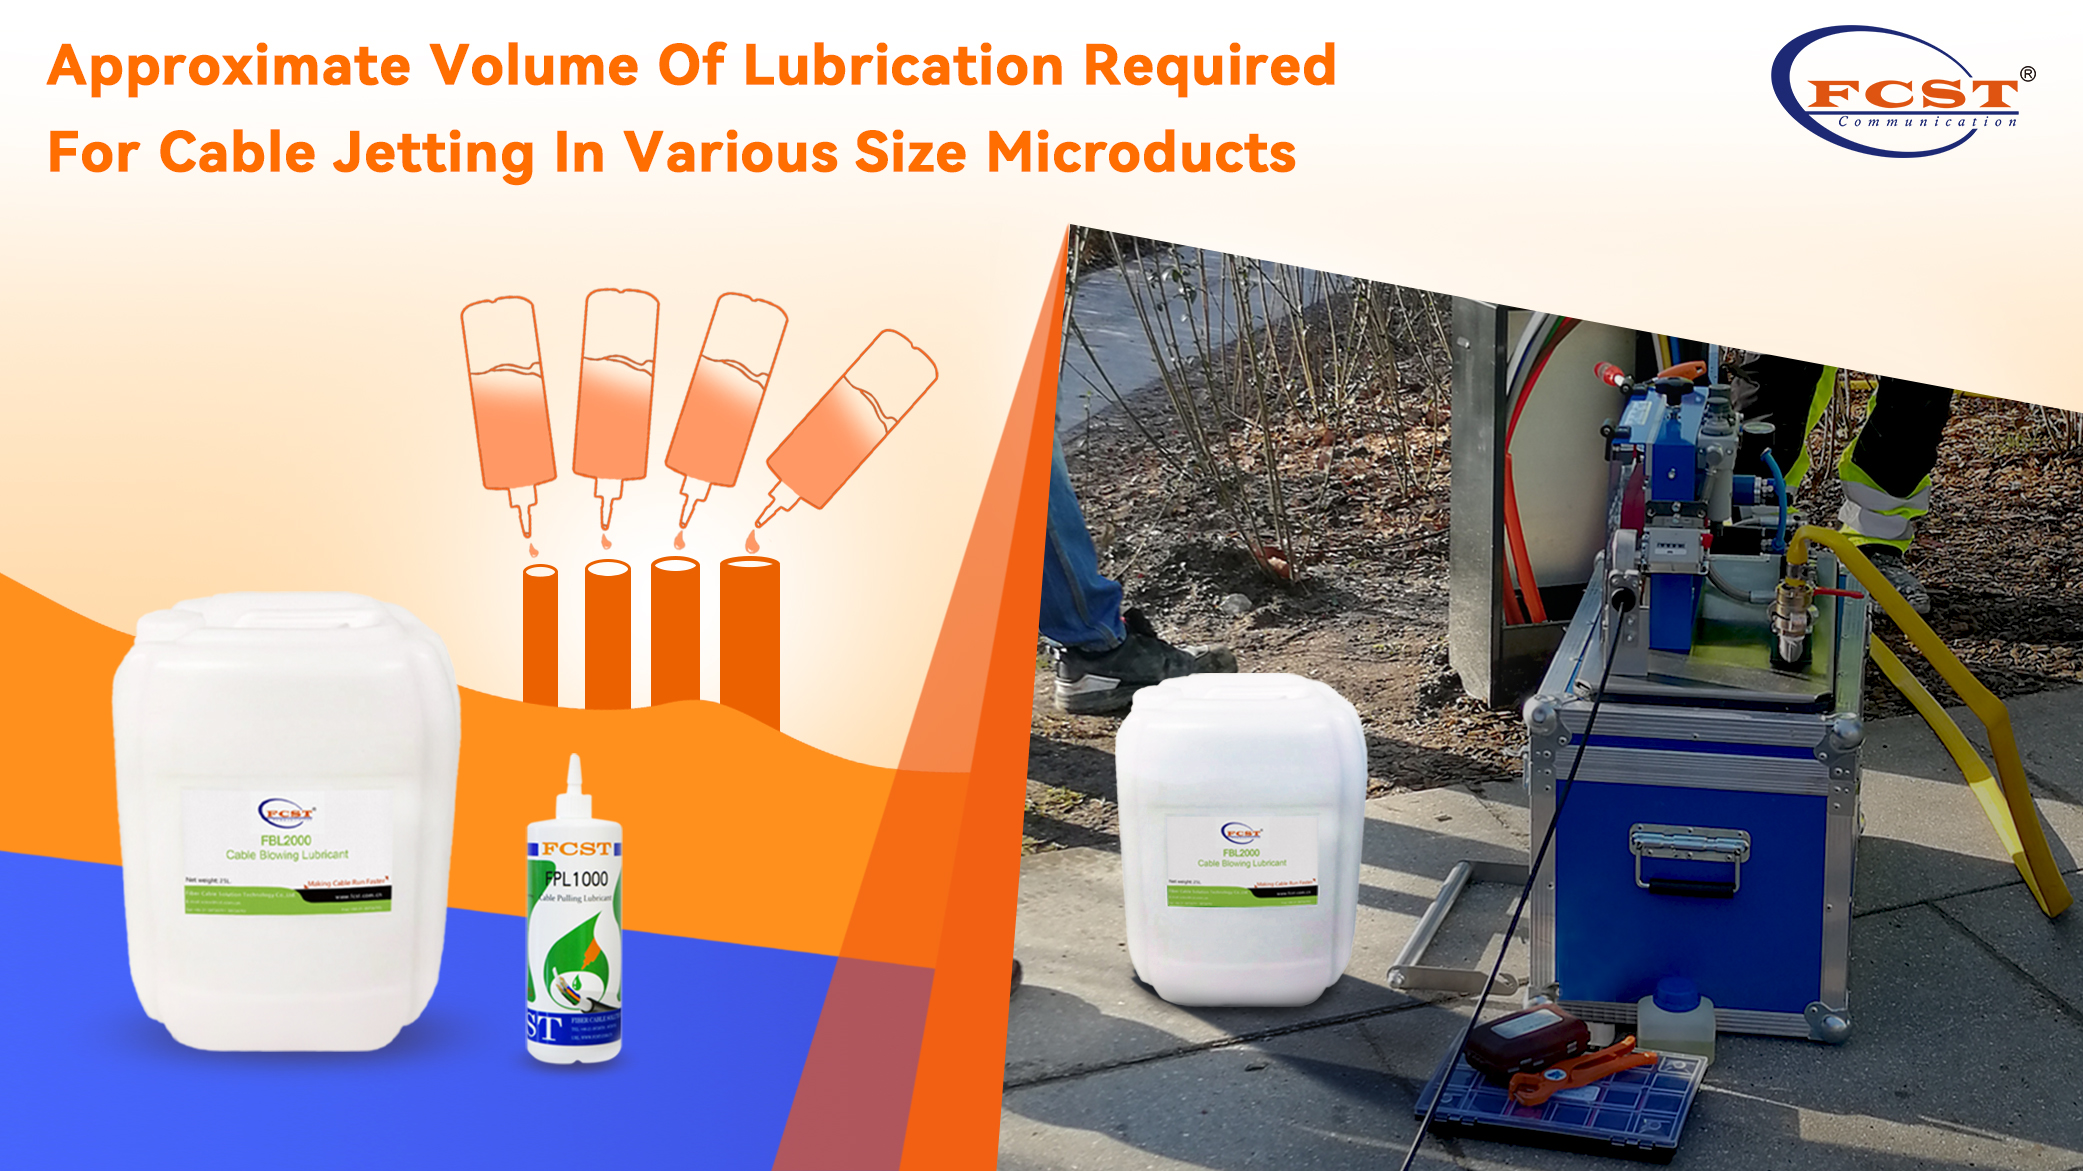 Approximate Volume Of Lubrication Required For Cable Jetting In Various Size Microducts